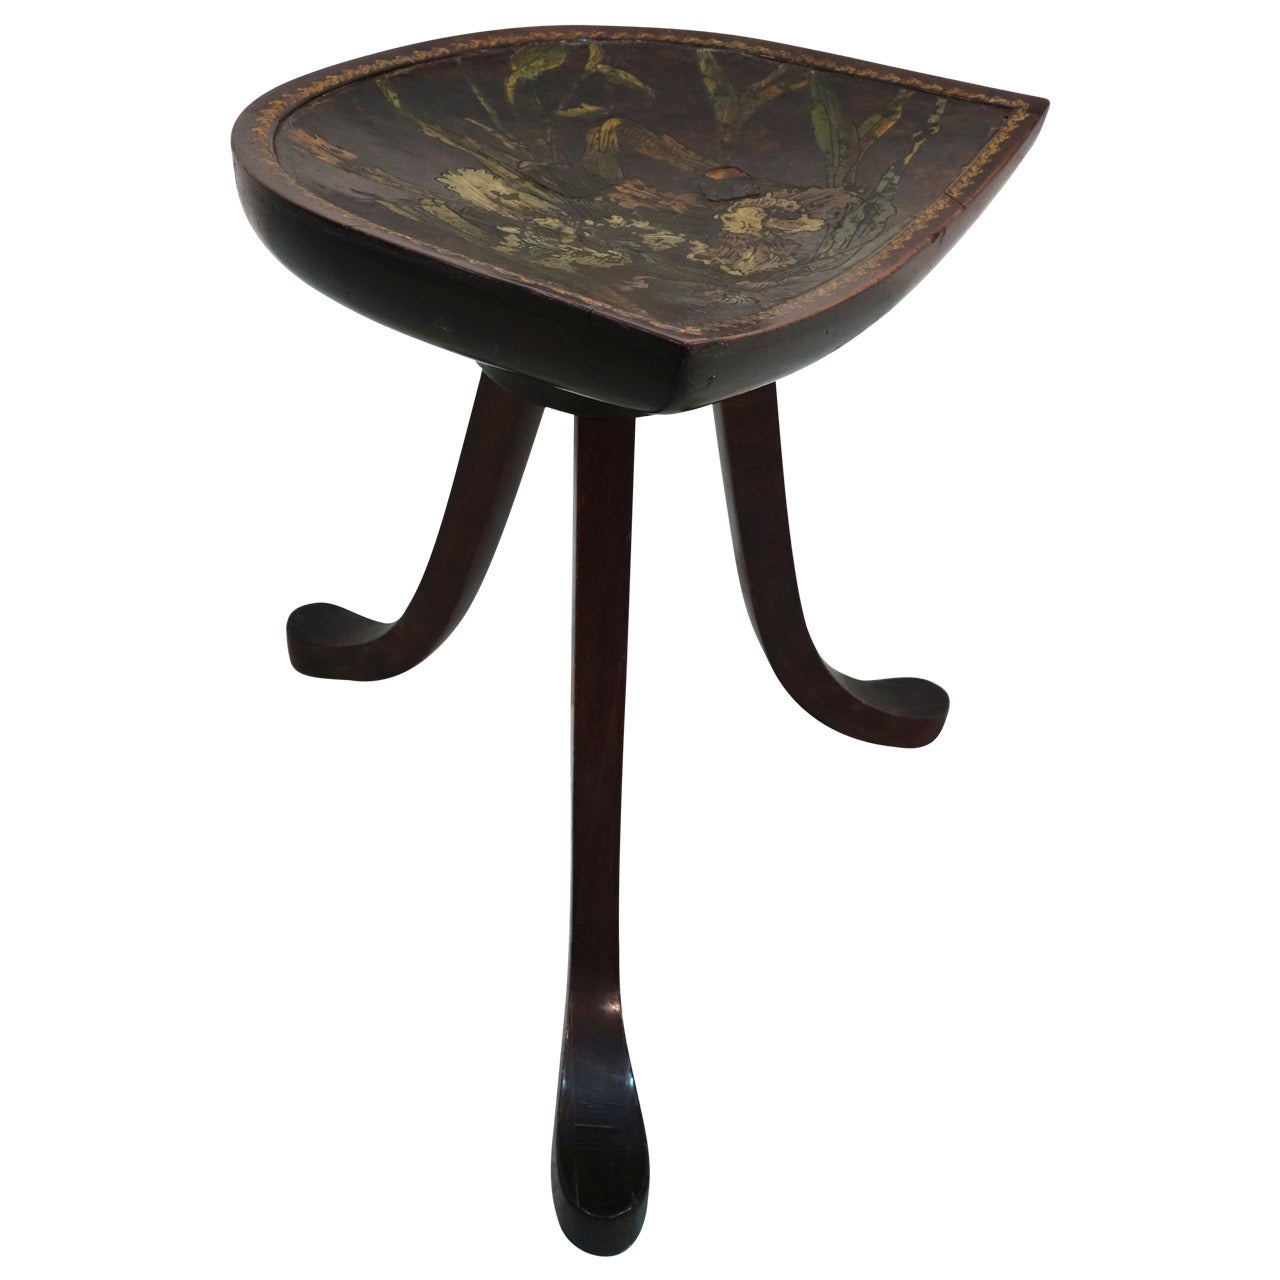 Thebes Stool Attributed to Leonard F. Wyburd for Liberty & Co